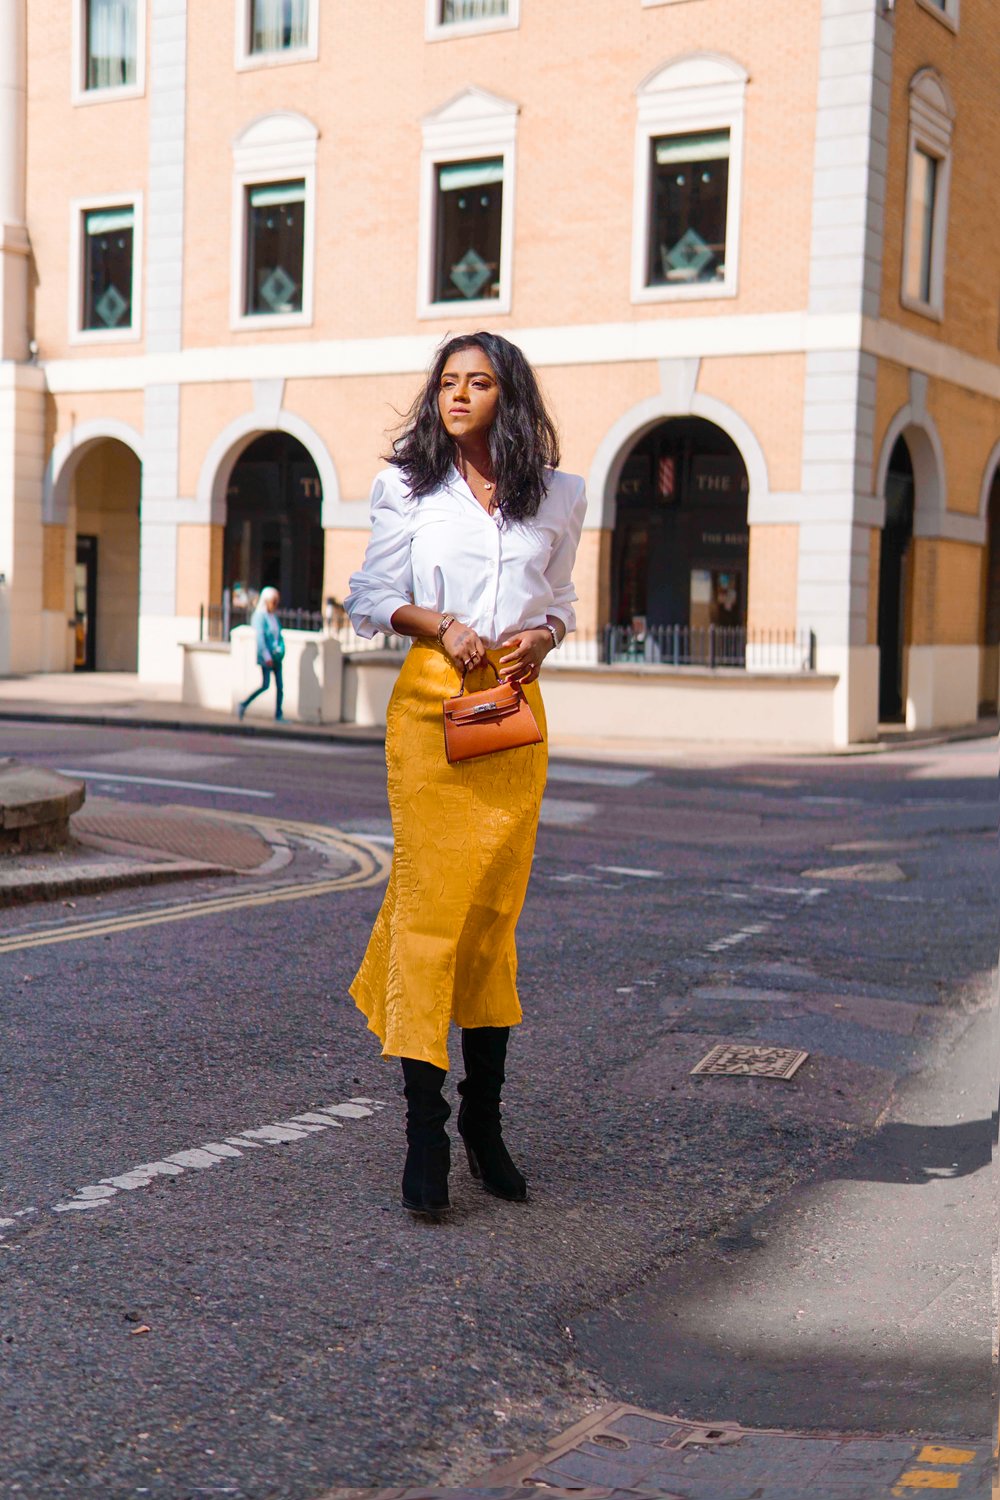 Sachini standing in the street with a white blouse, long yellow skirt, black boot holding a brown Hermès mini Kelly